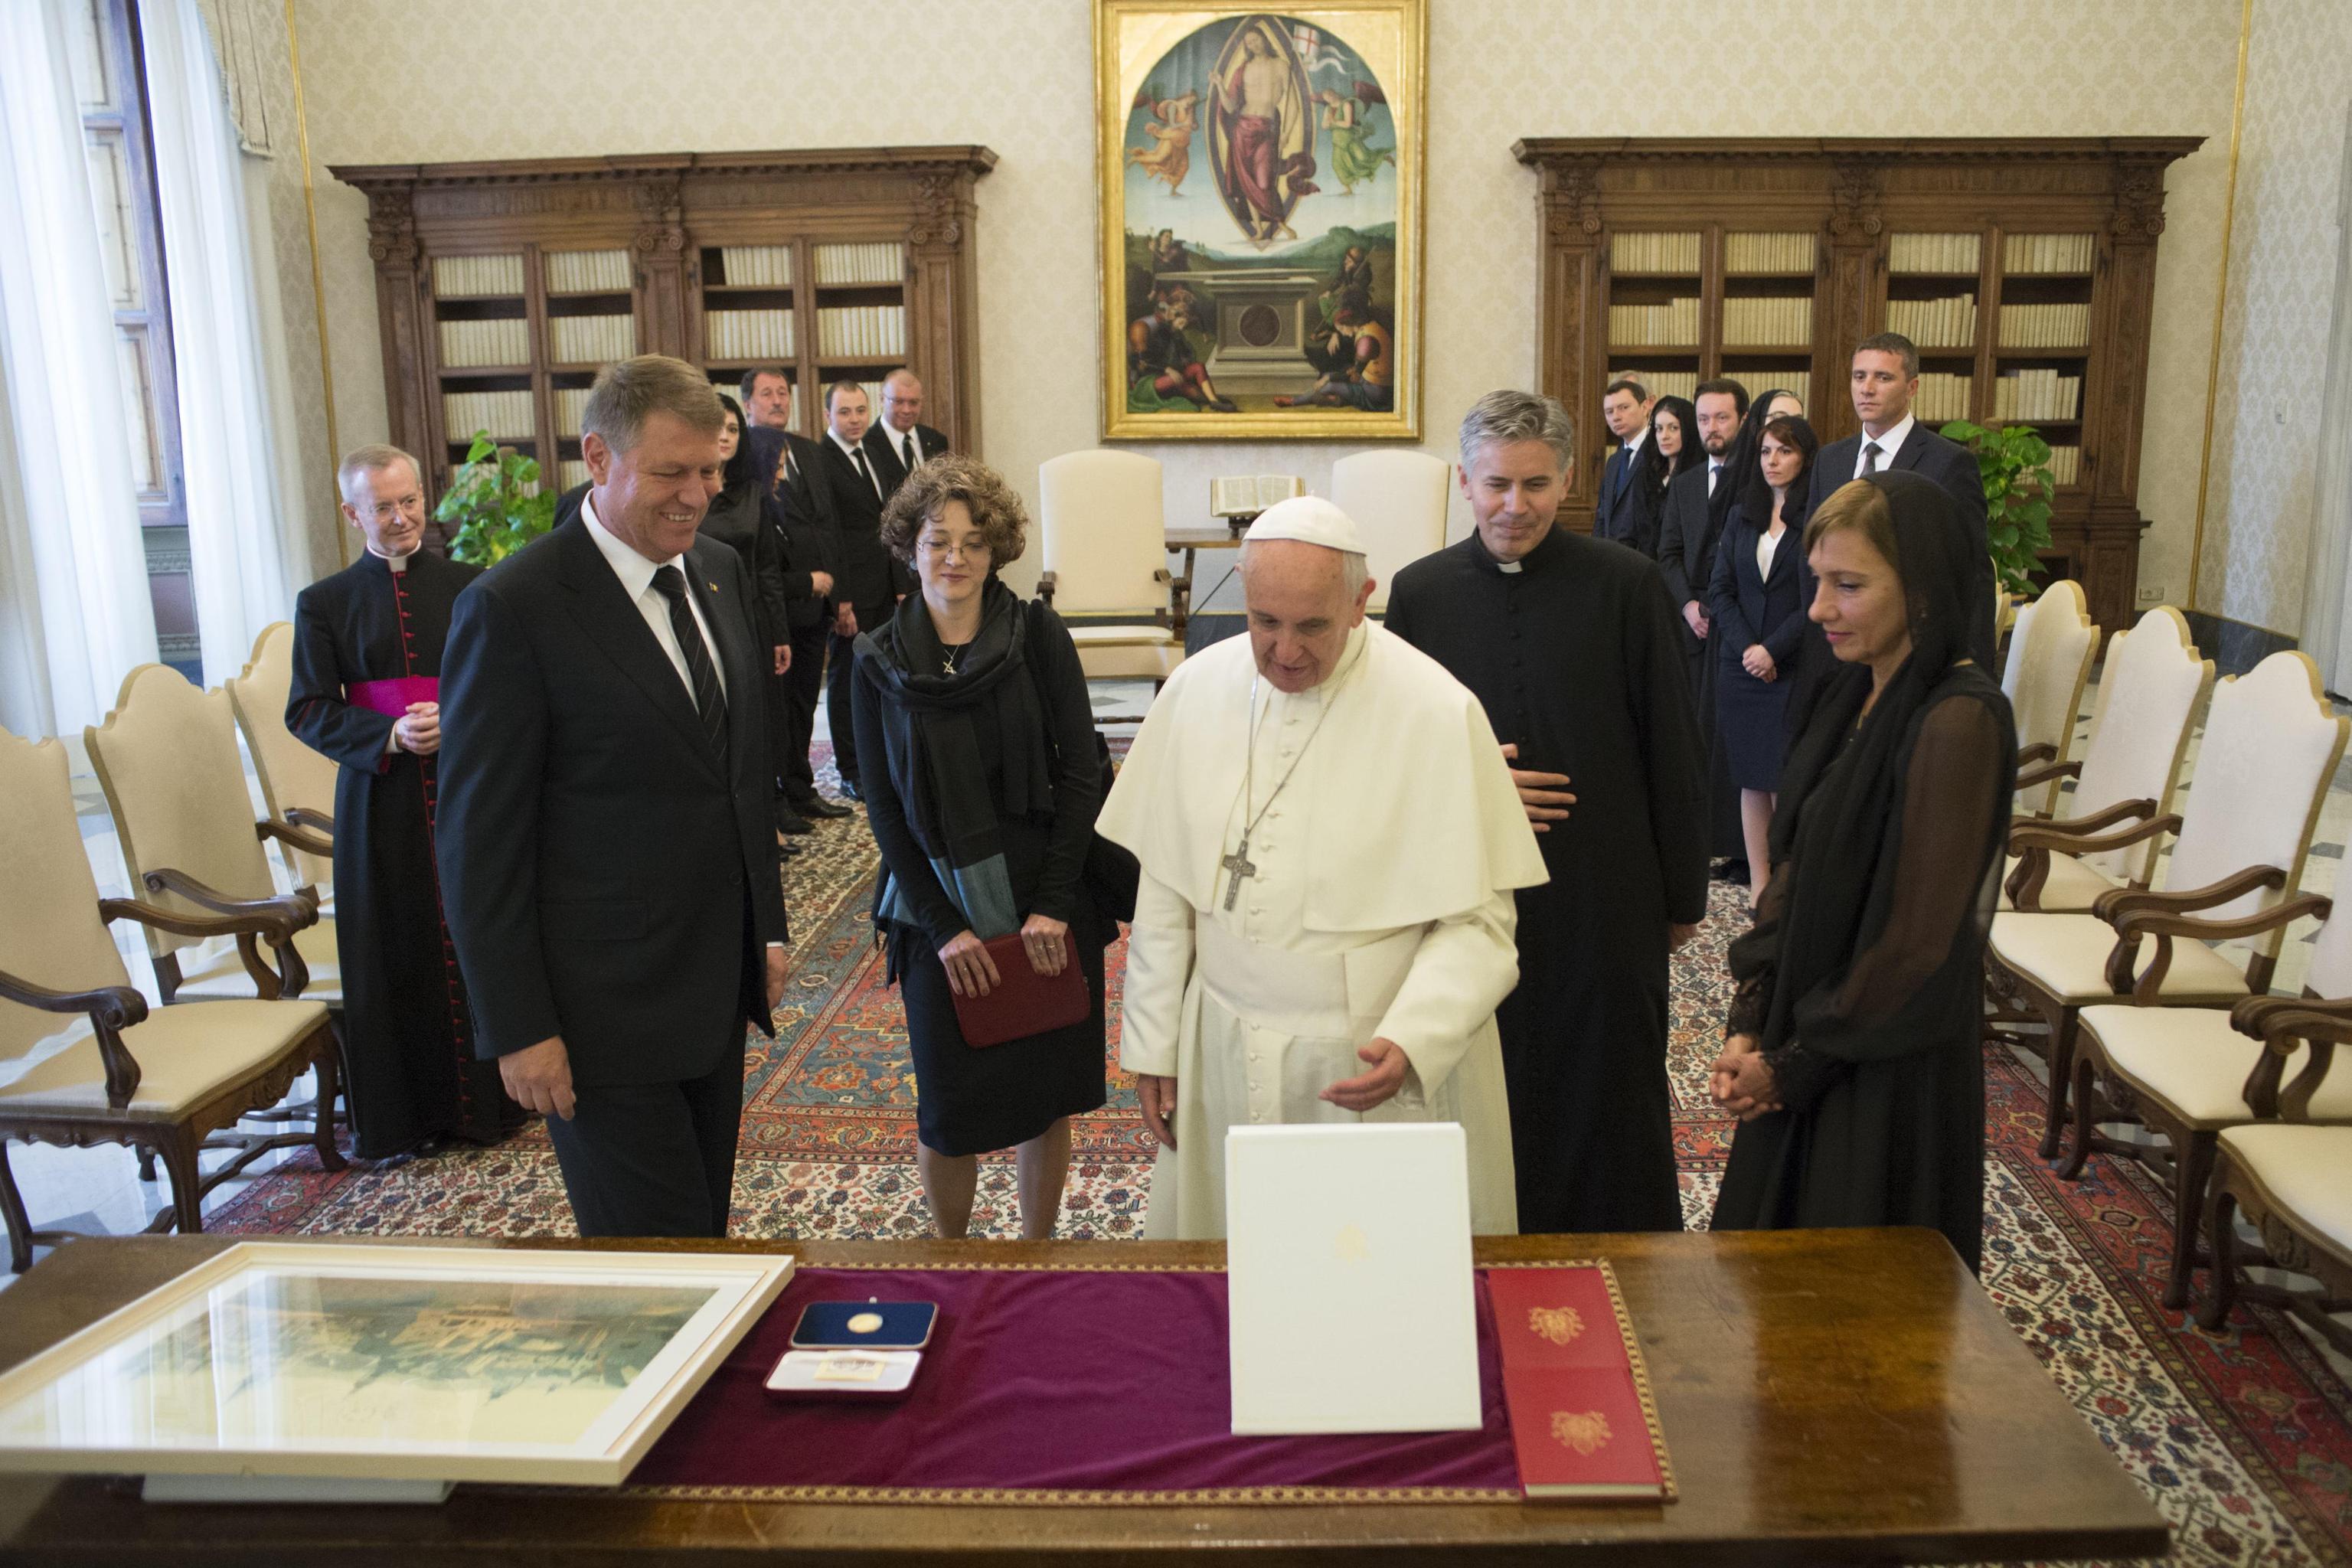 Pope Francis meeting Romanian President Klaus Werner Iohannis during a private audience in the pontiff's studio